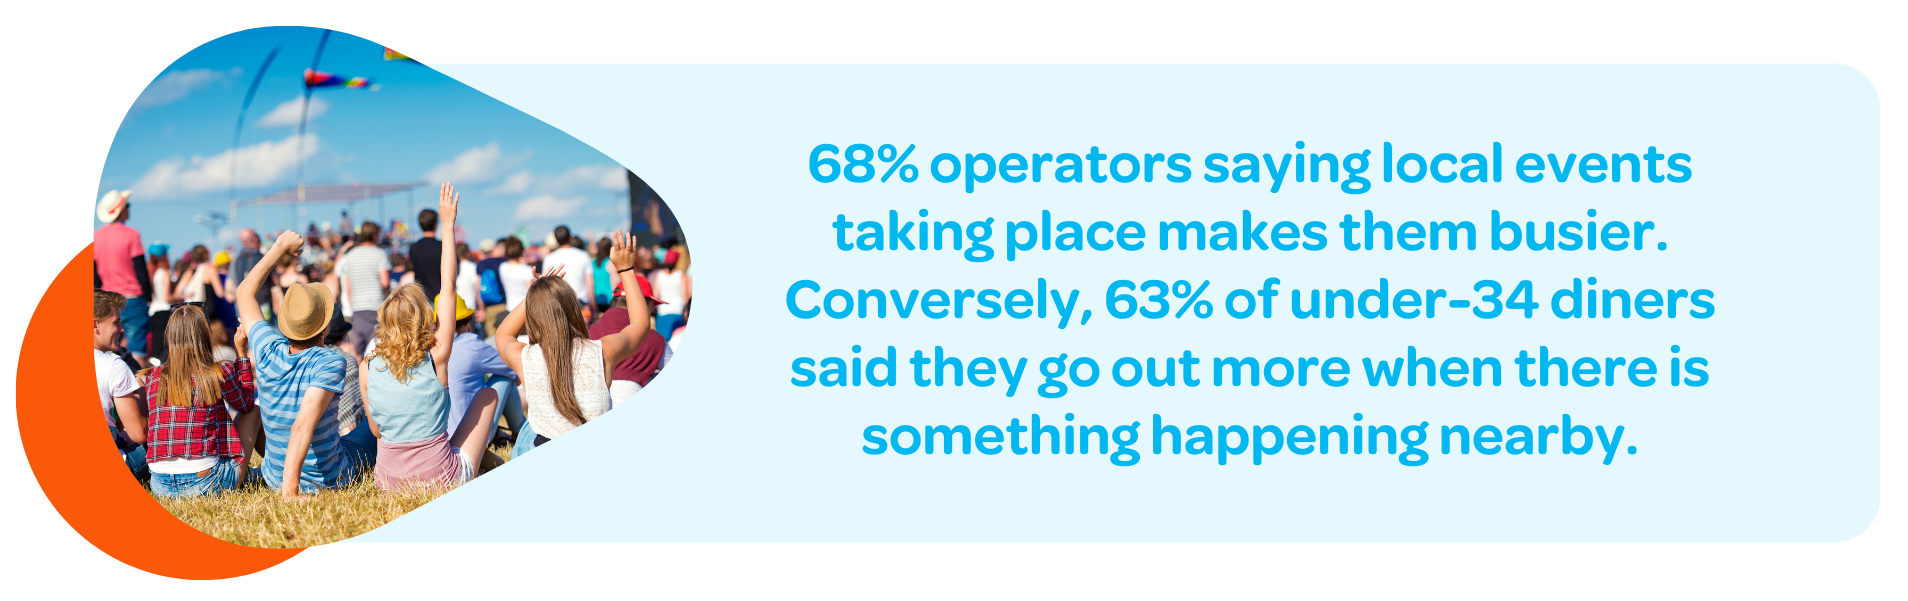 68% operators saying local events taking place makes them busier